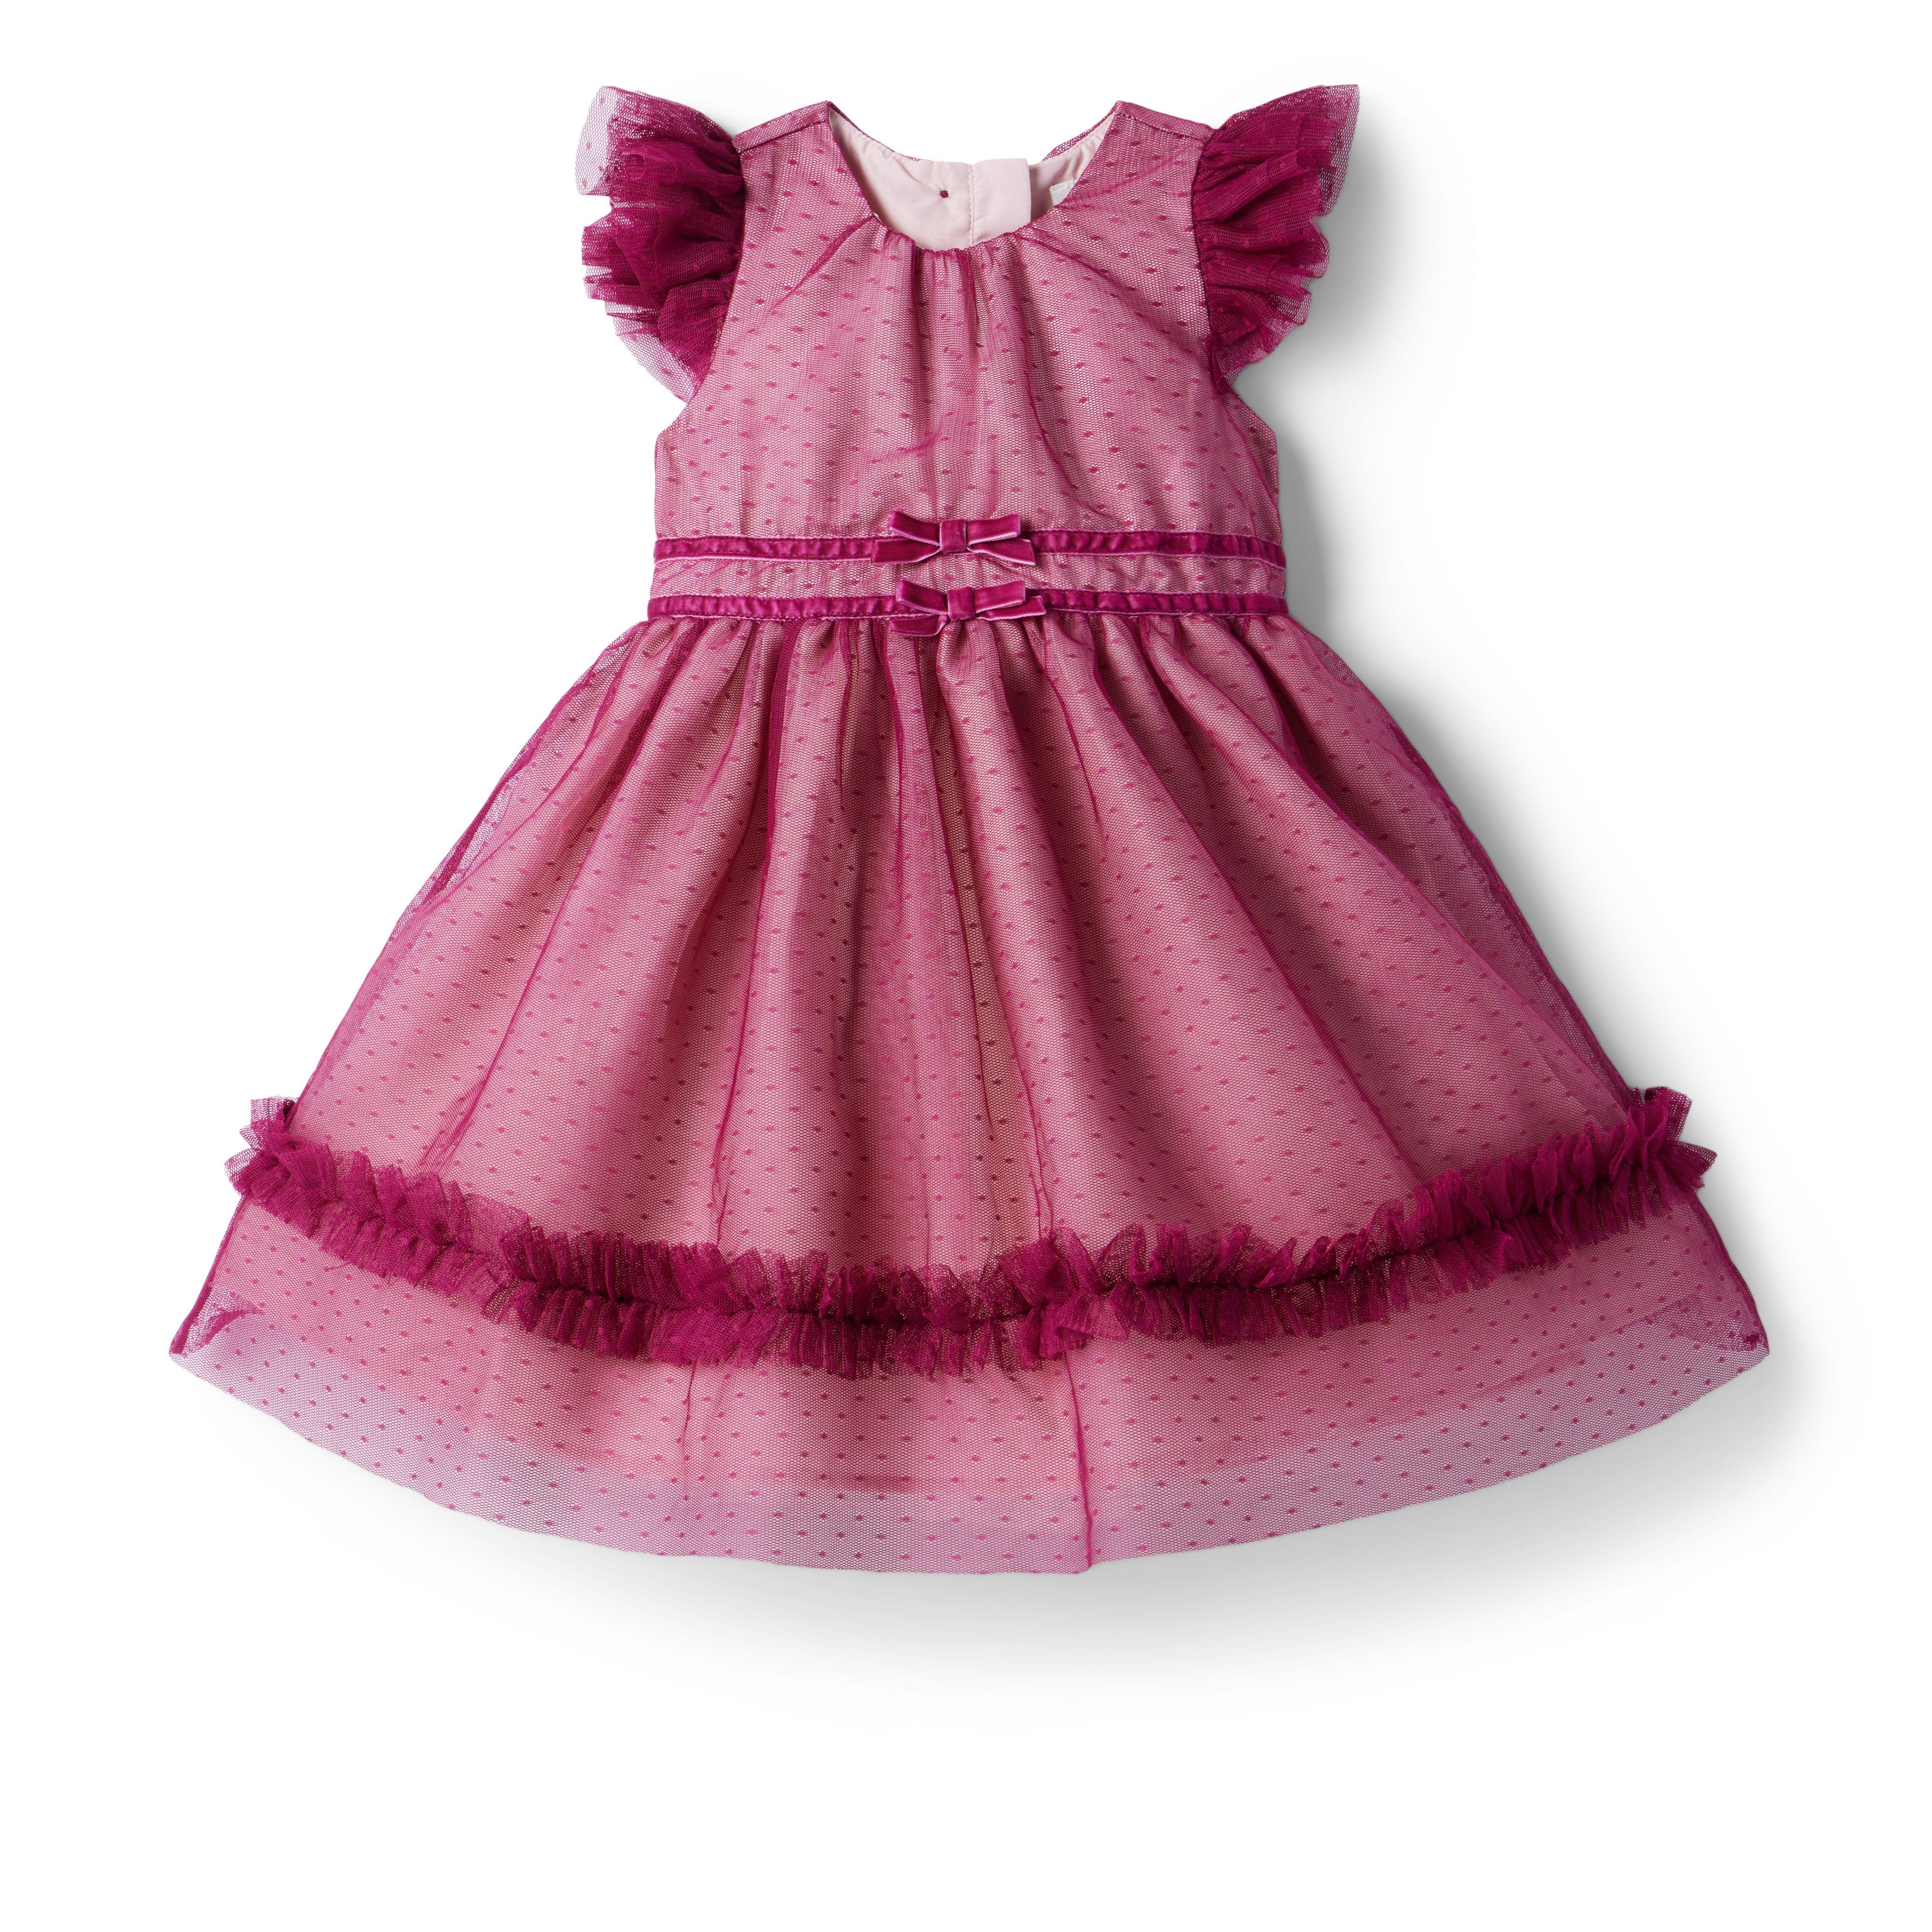 Radiance Dress Dot Ruffle Girl by Tulle Jack and Raspberry Janie